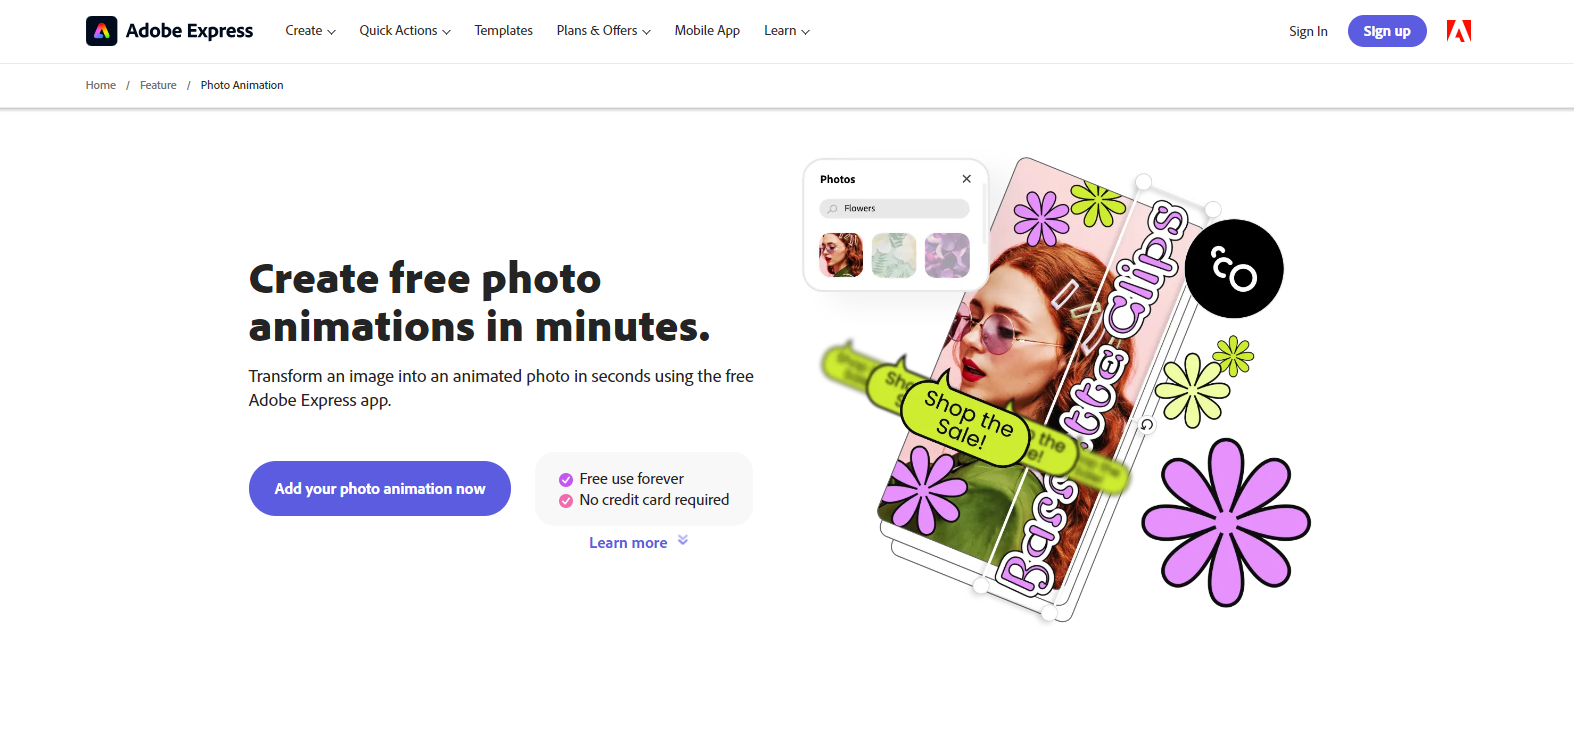 home page of adobe express animation tool